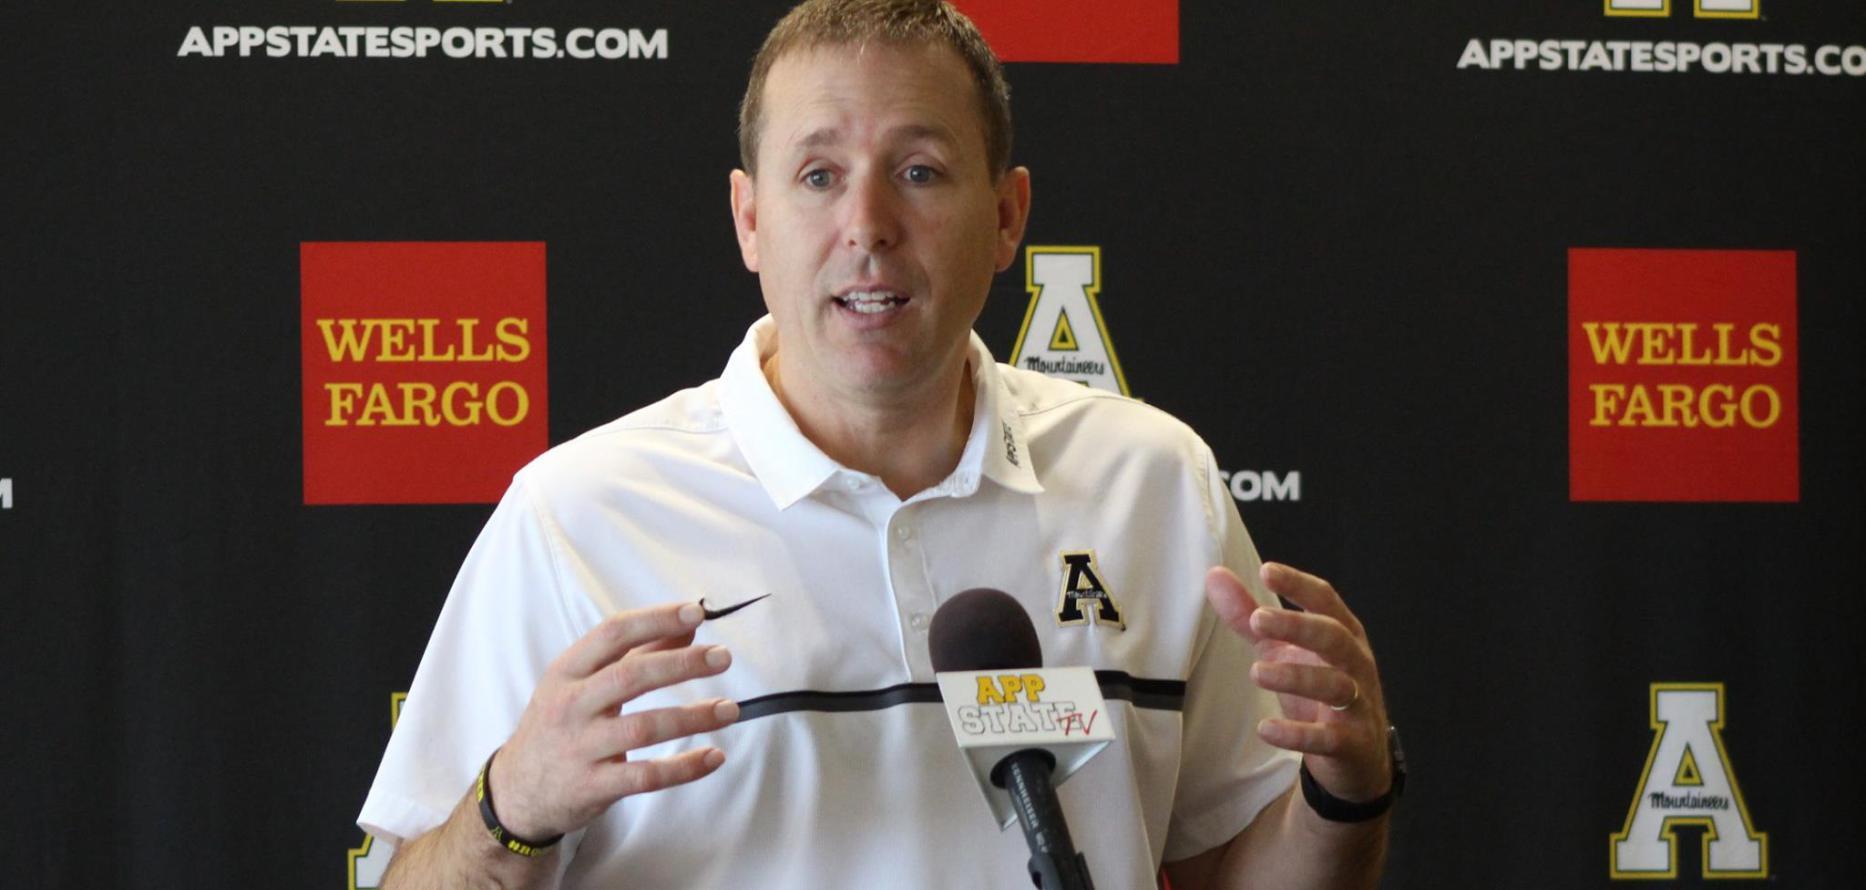 Satterfield during National Signing Day in February 2017.
File Photo 